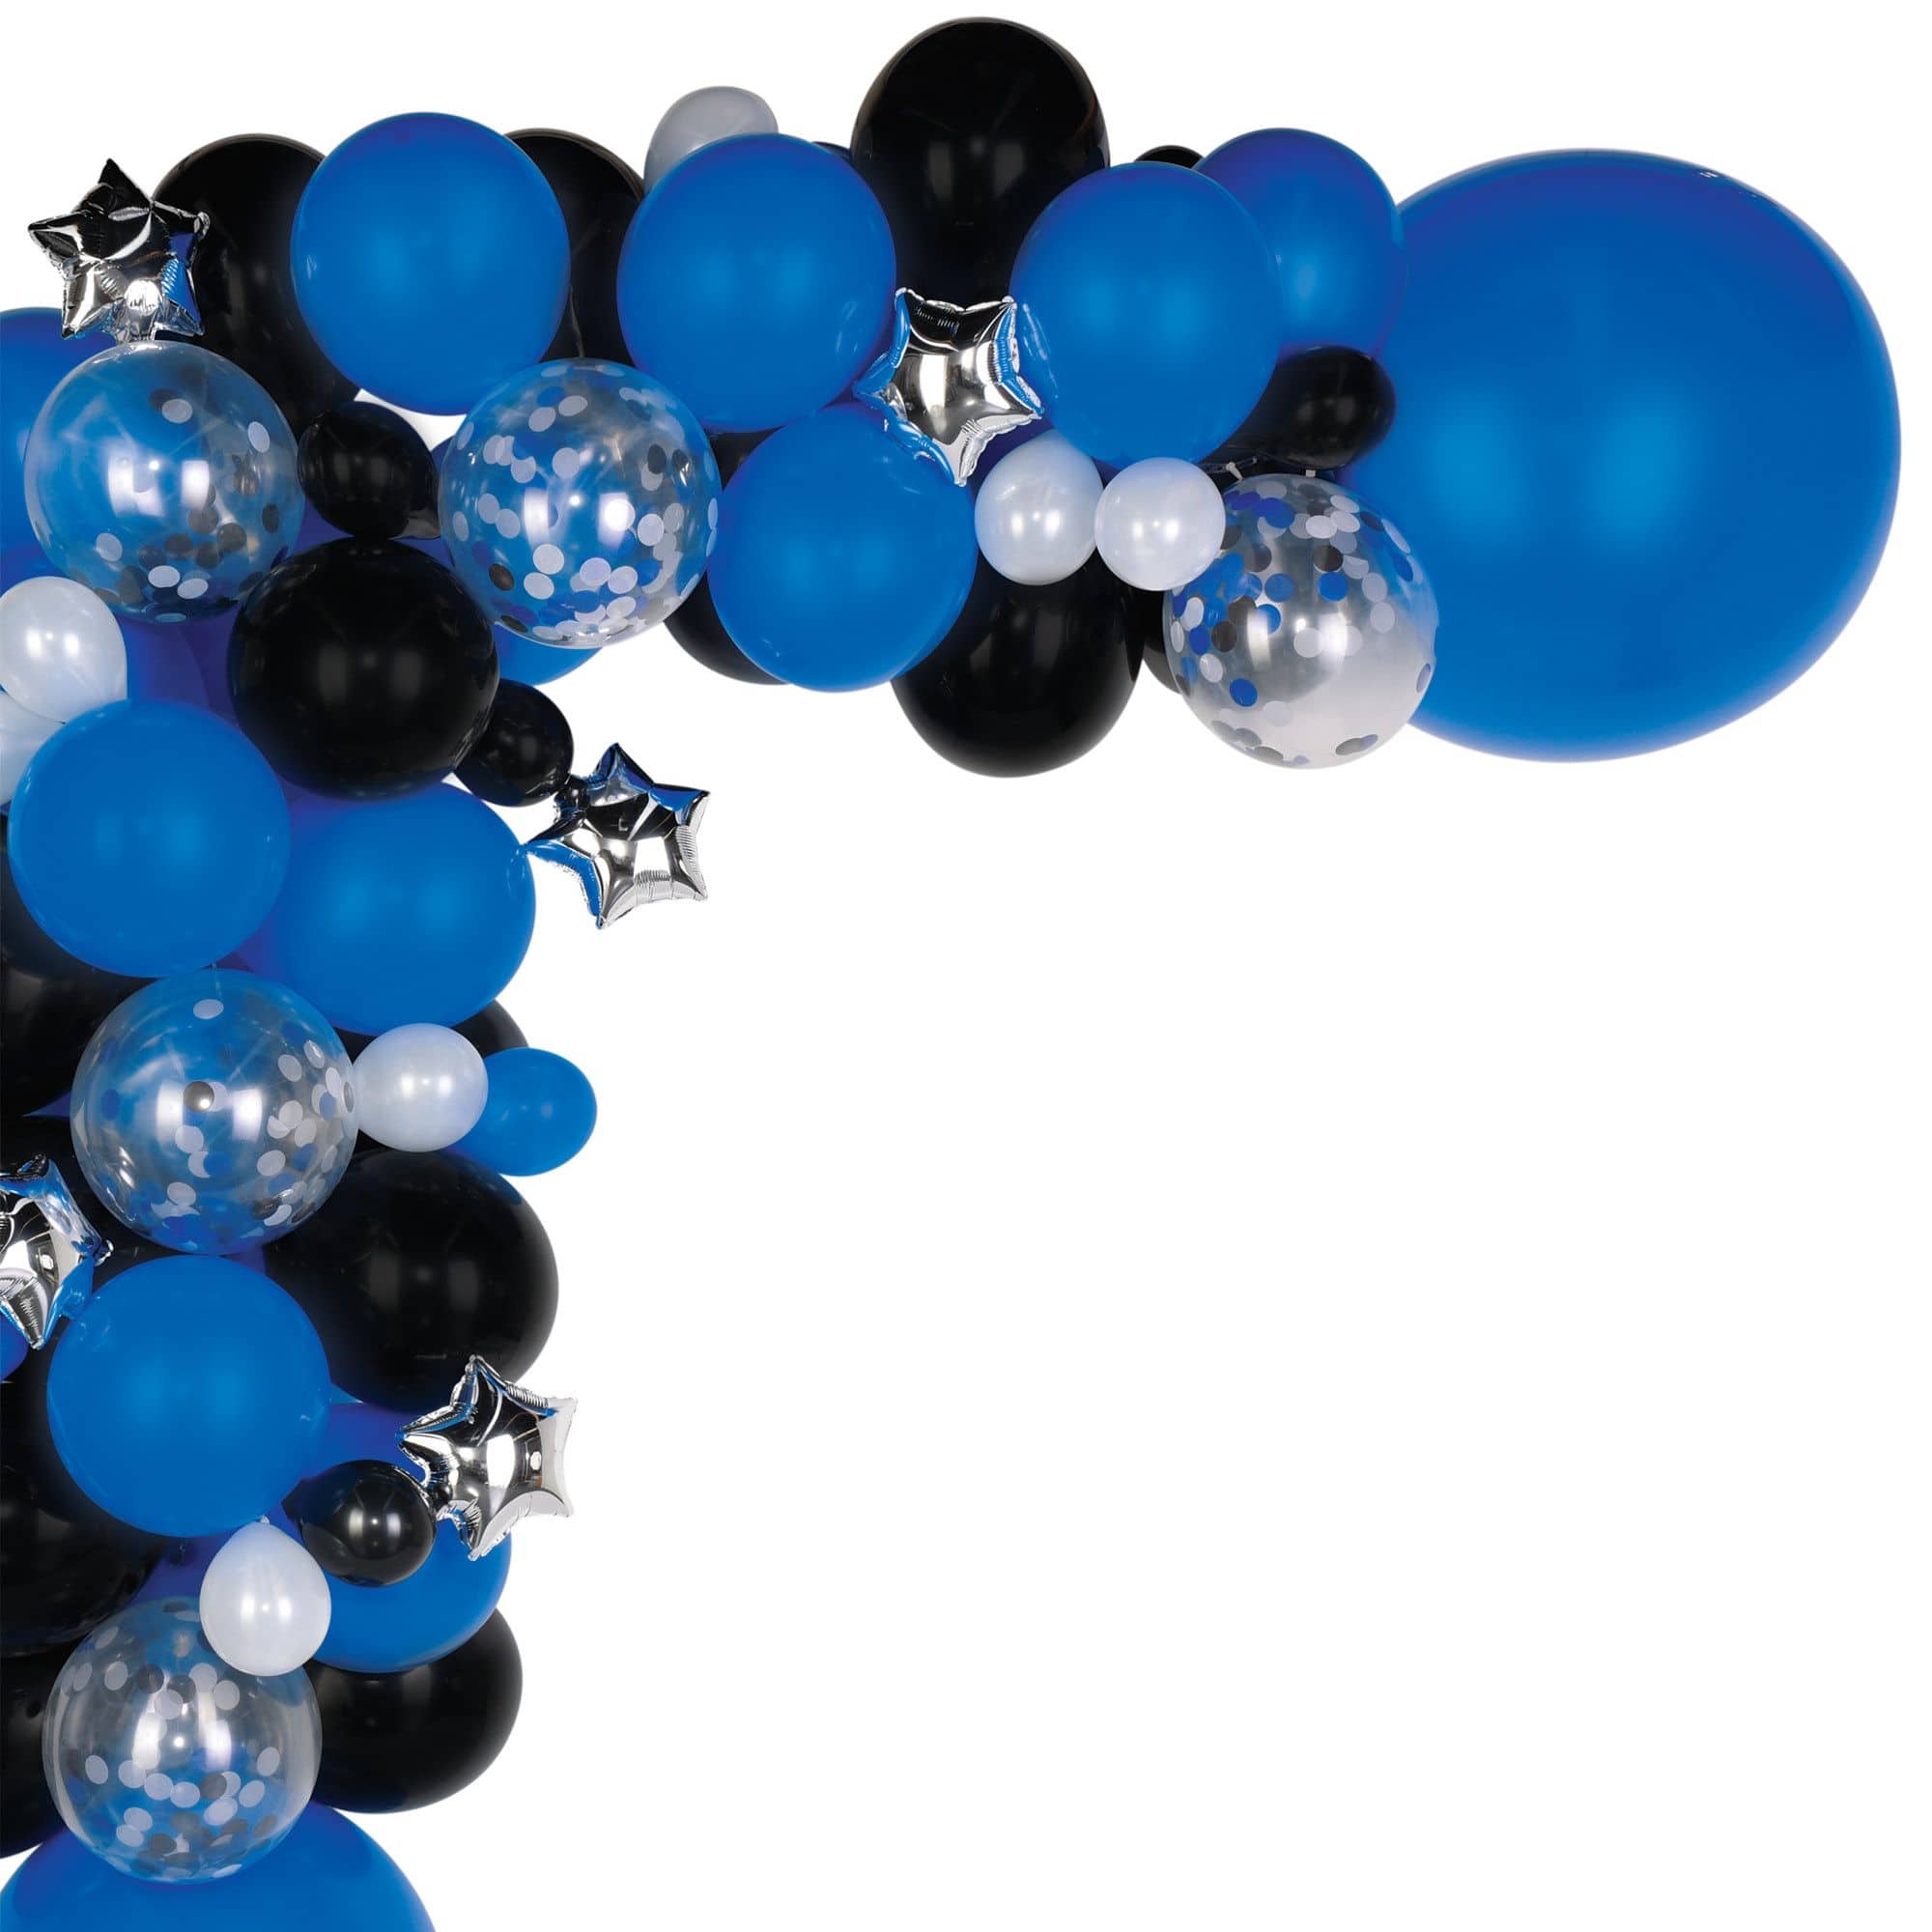 Nautical Balloon Garland Kit Navy Blue Red Confetti Balloons for